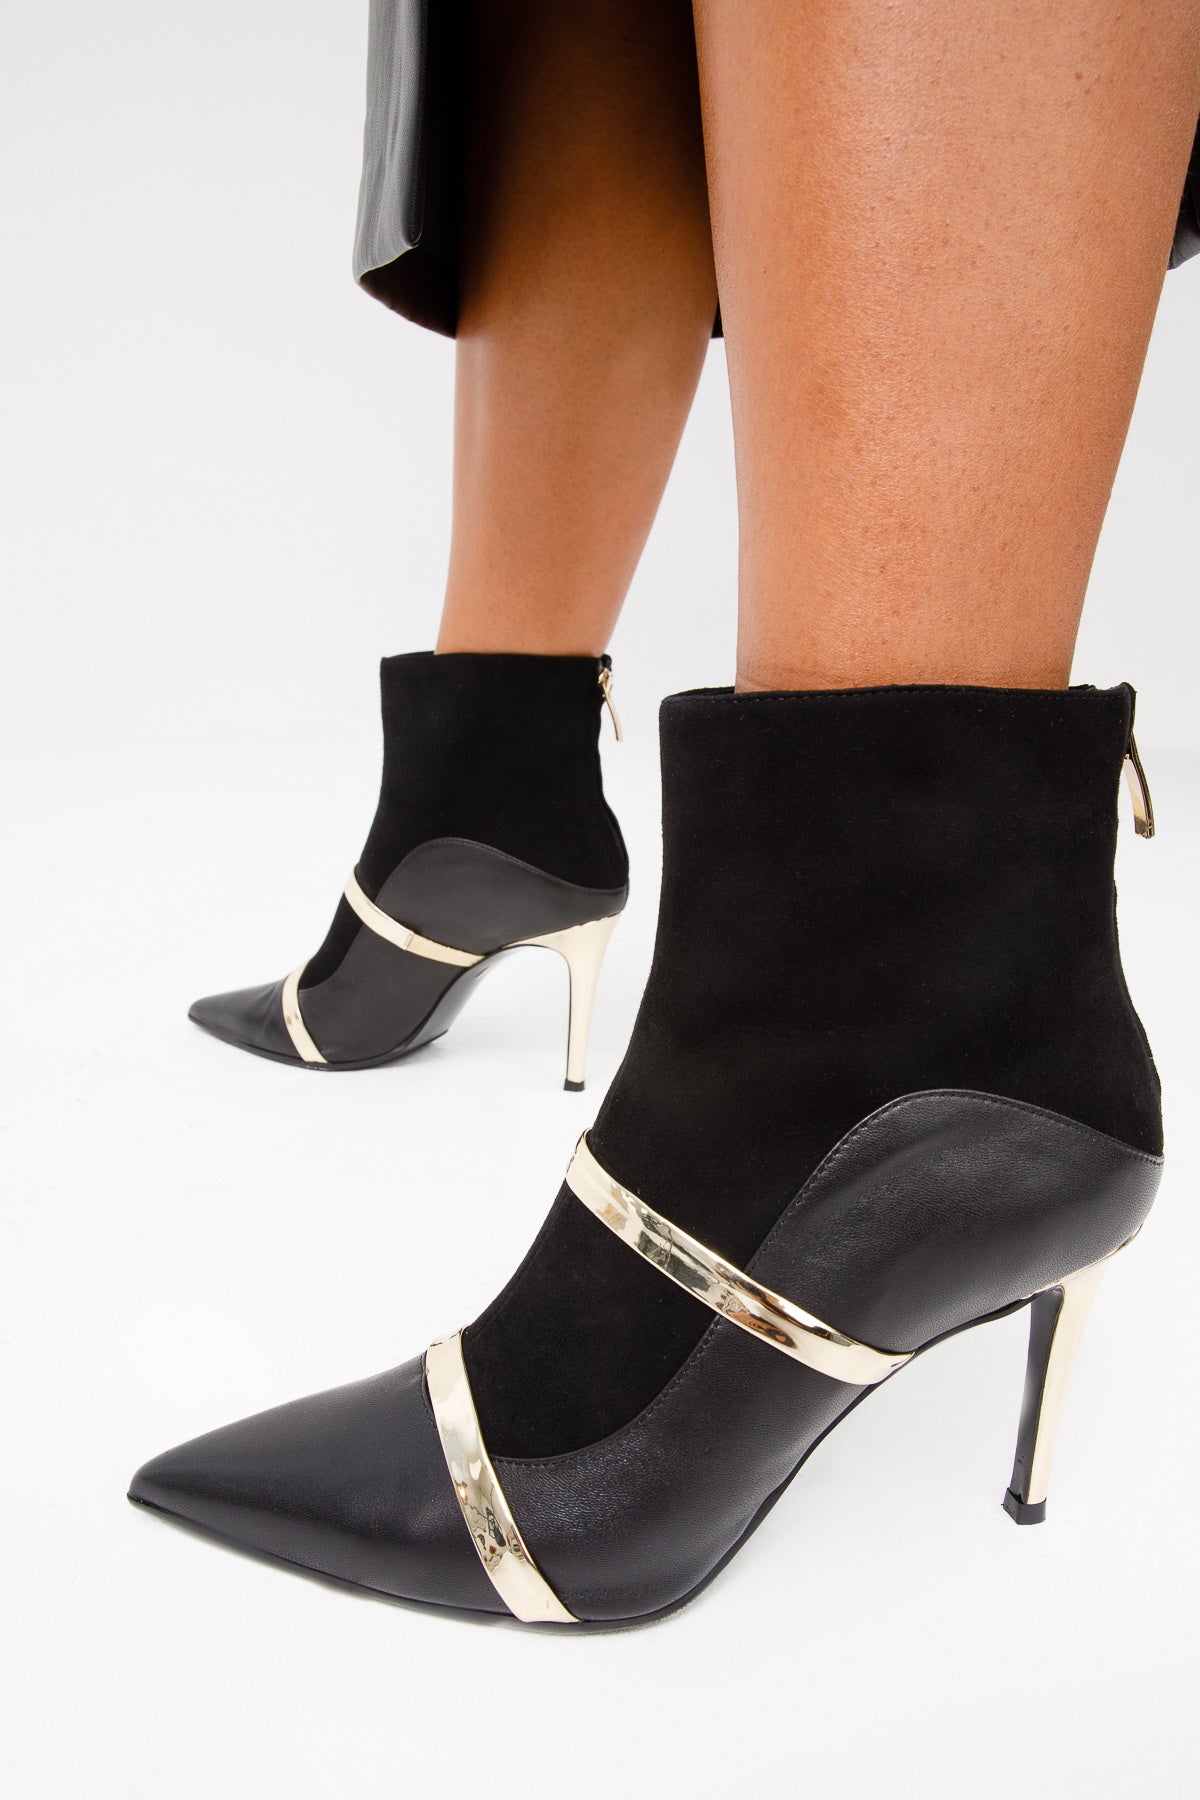 The Manila Black Leather Ankle Women Boot